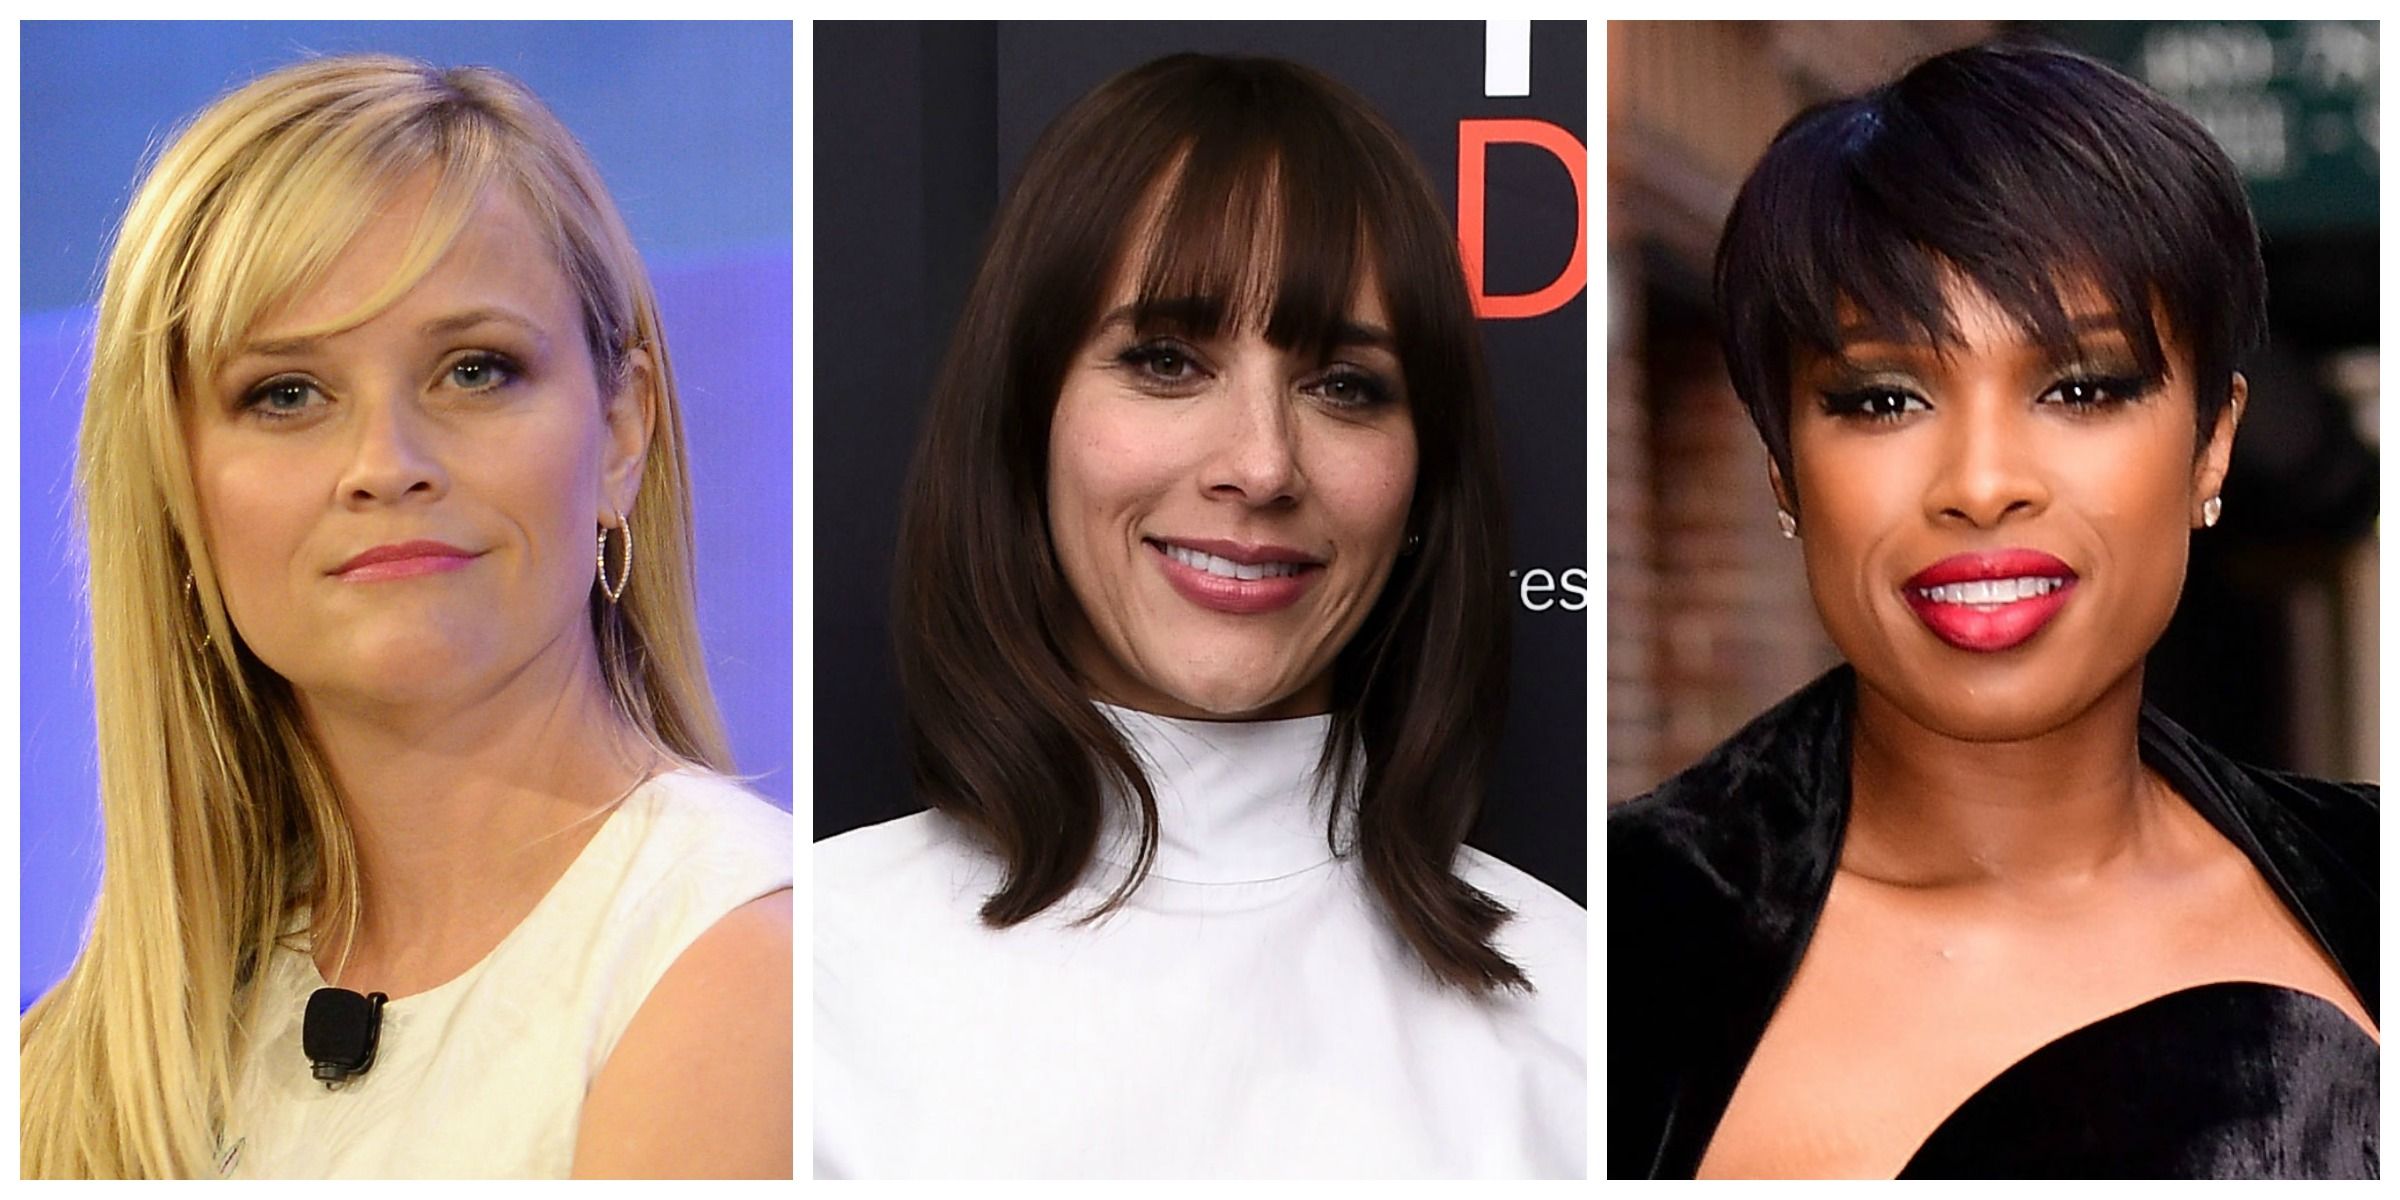 18 Celebrity Hairstyles With Bangs - How To Style Hair With Bangs